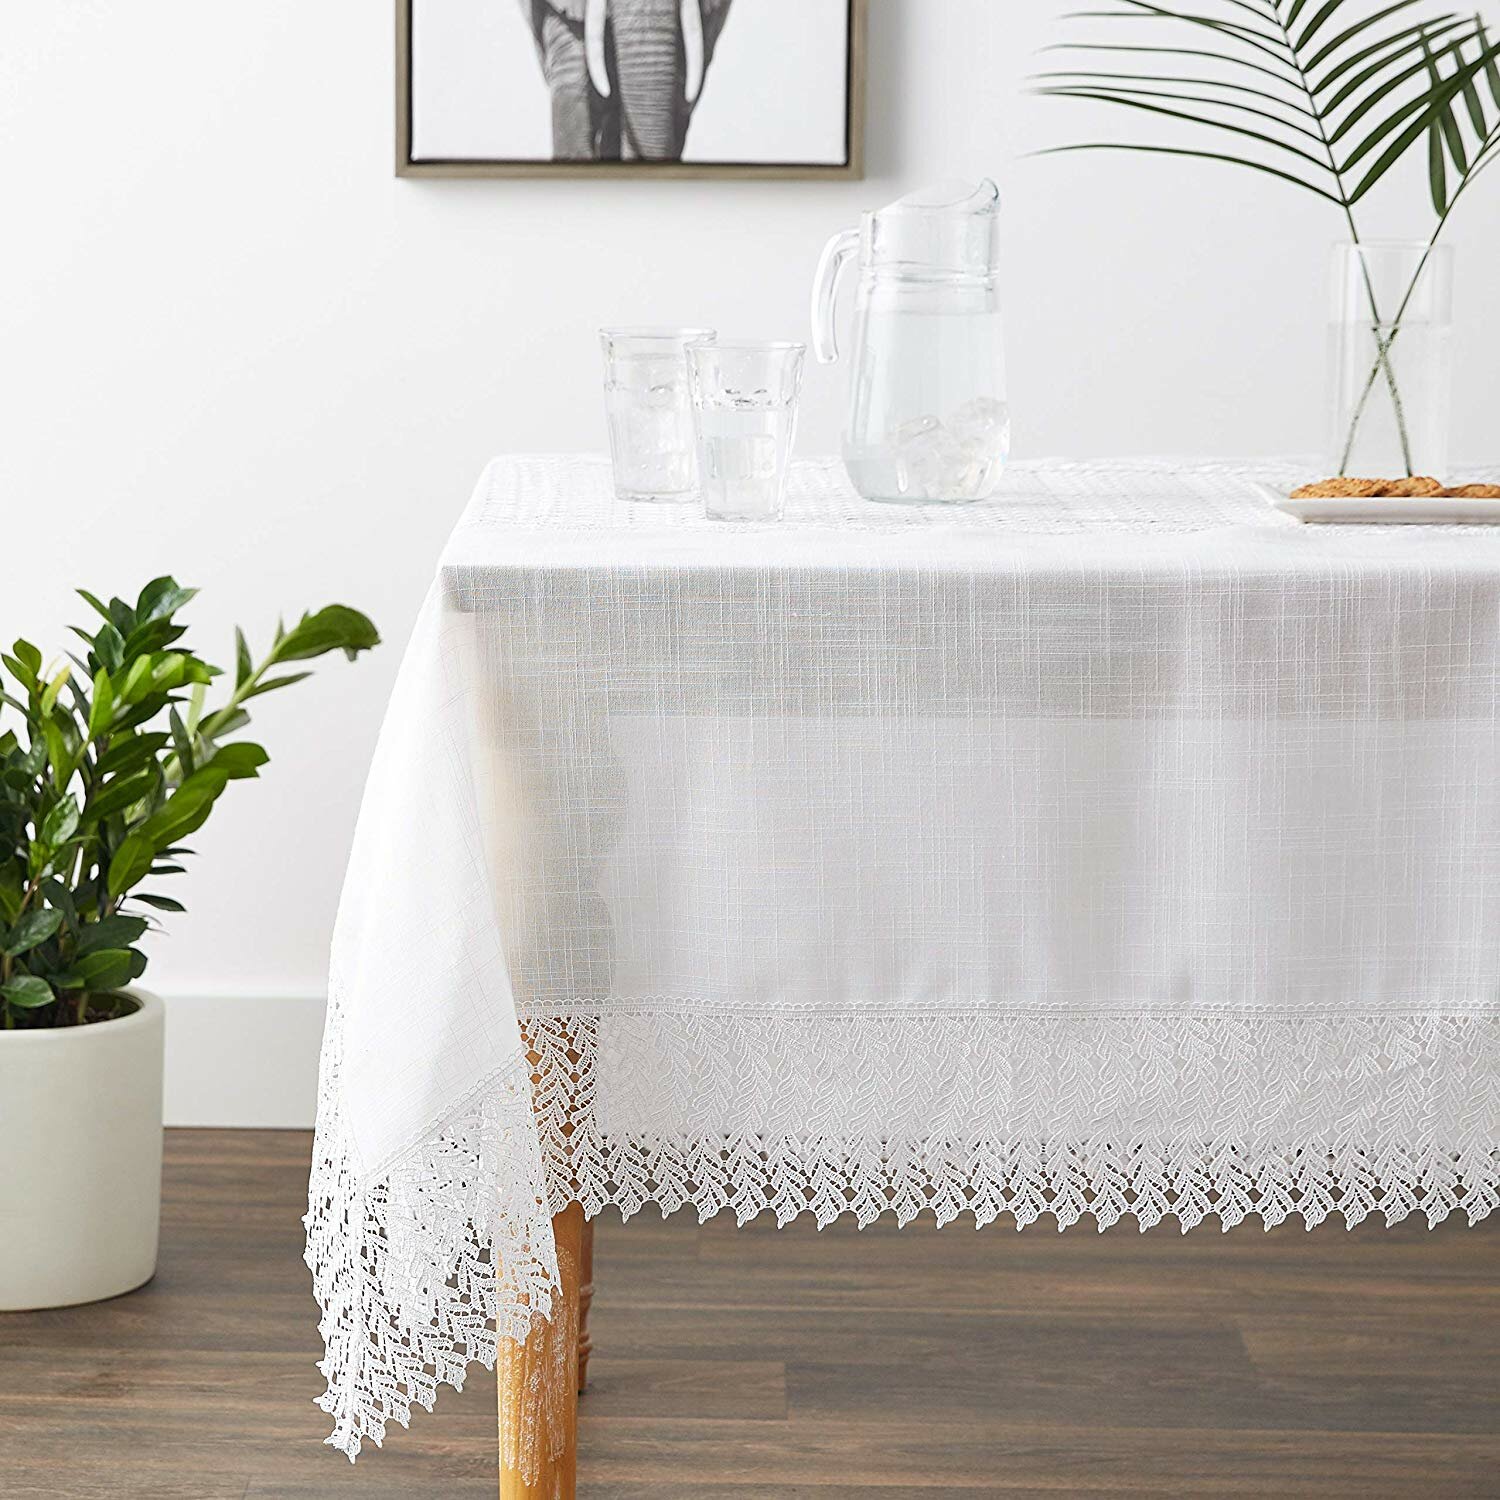 Rectangular/Square, 60x120 Inch Kitchen Dining Room Table Linens WIHVE Tablecloth Dream Catchers Vintage Style 100% Polyester Indoor/Outdoor Soil Resistant Tablecloths